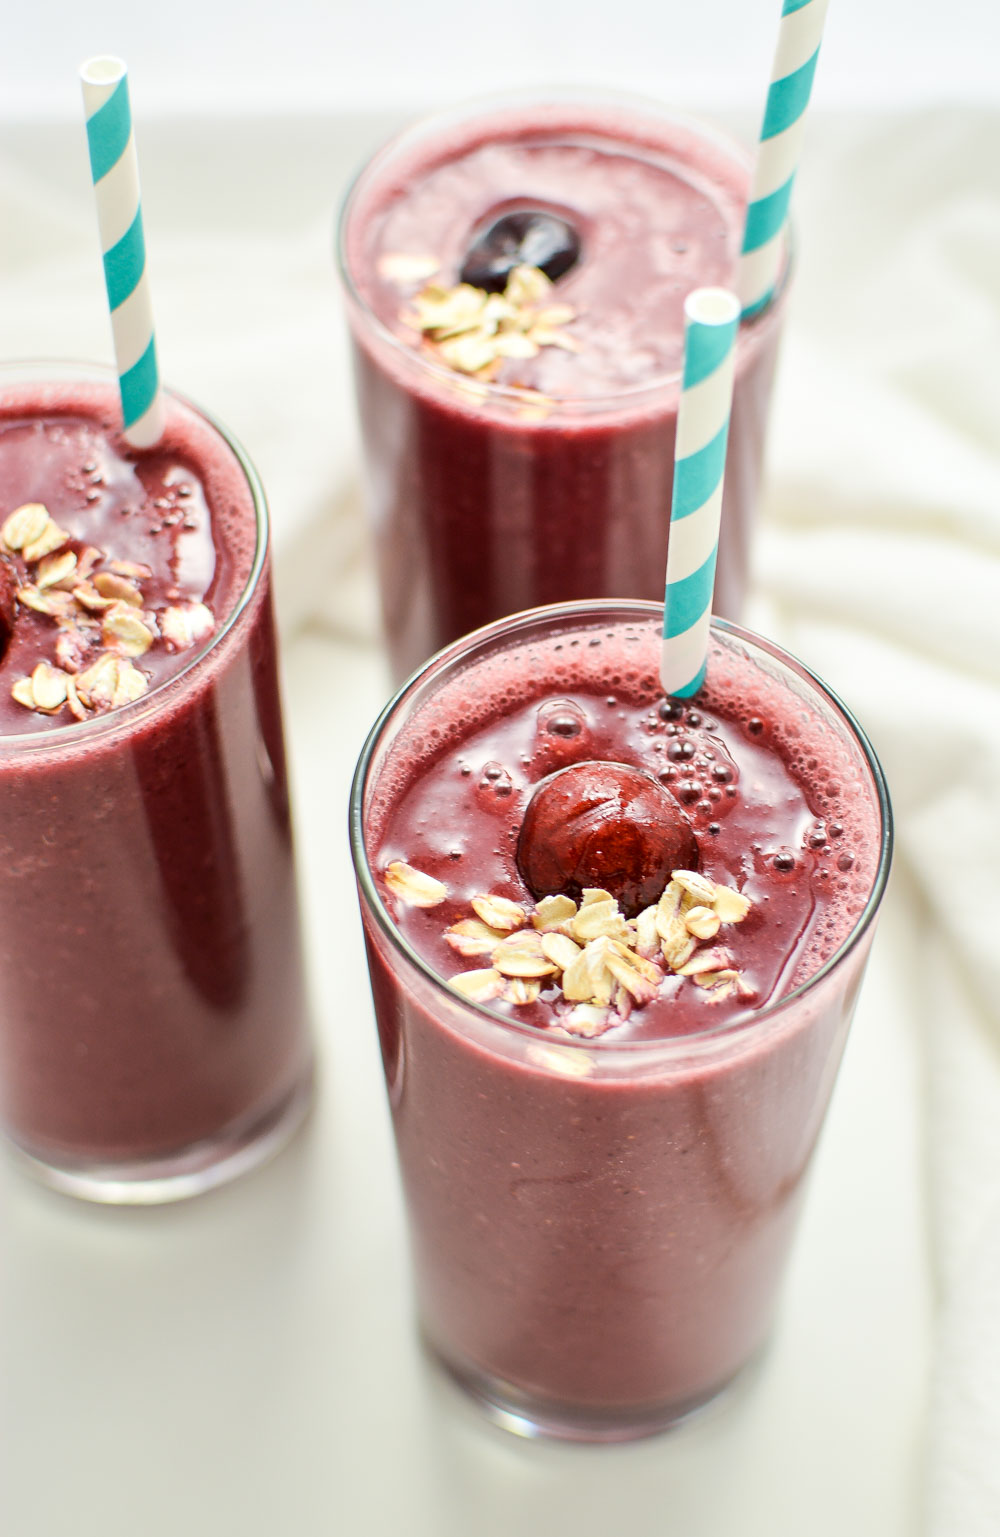 Strawberry Cherry Oatmeal Smoothies are hearty and filling, making them the perfect quick breakfast solution!